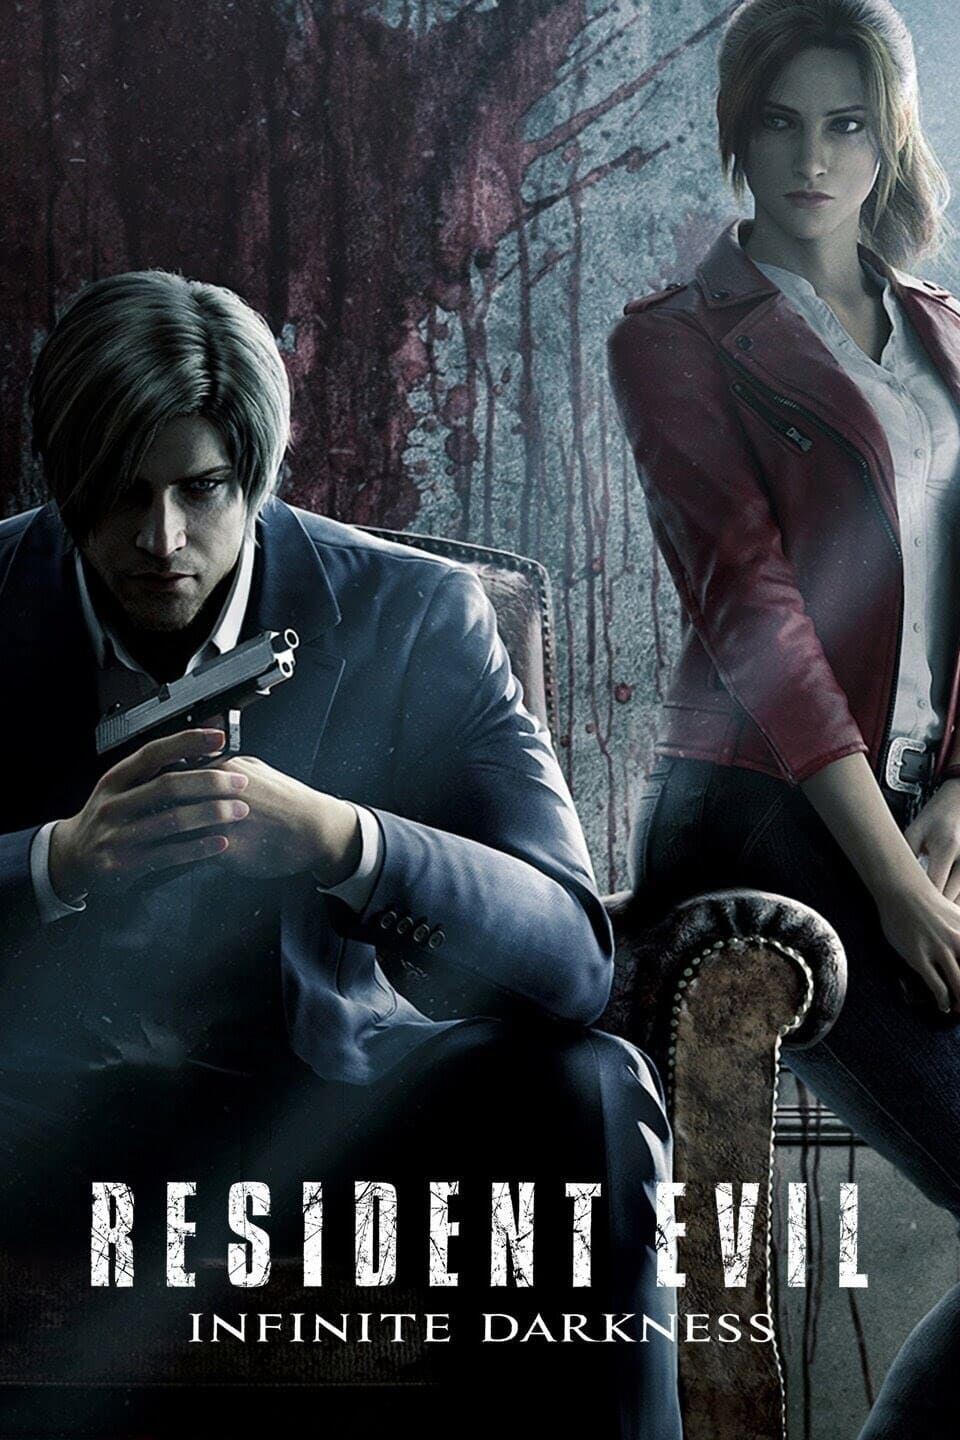 Resident Evil: Infinite Darkness TV Shows About Based On Video Game